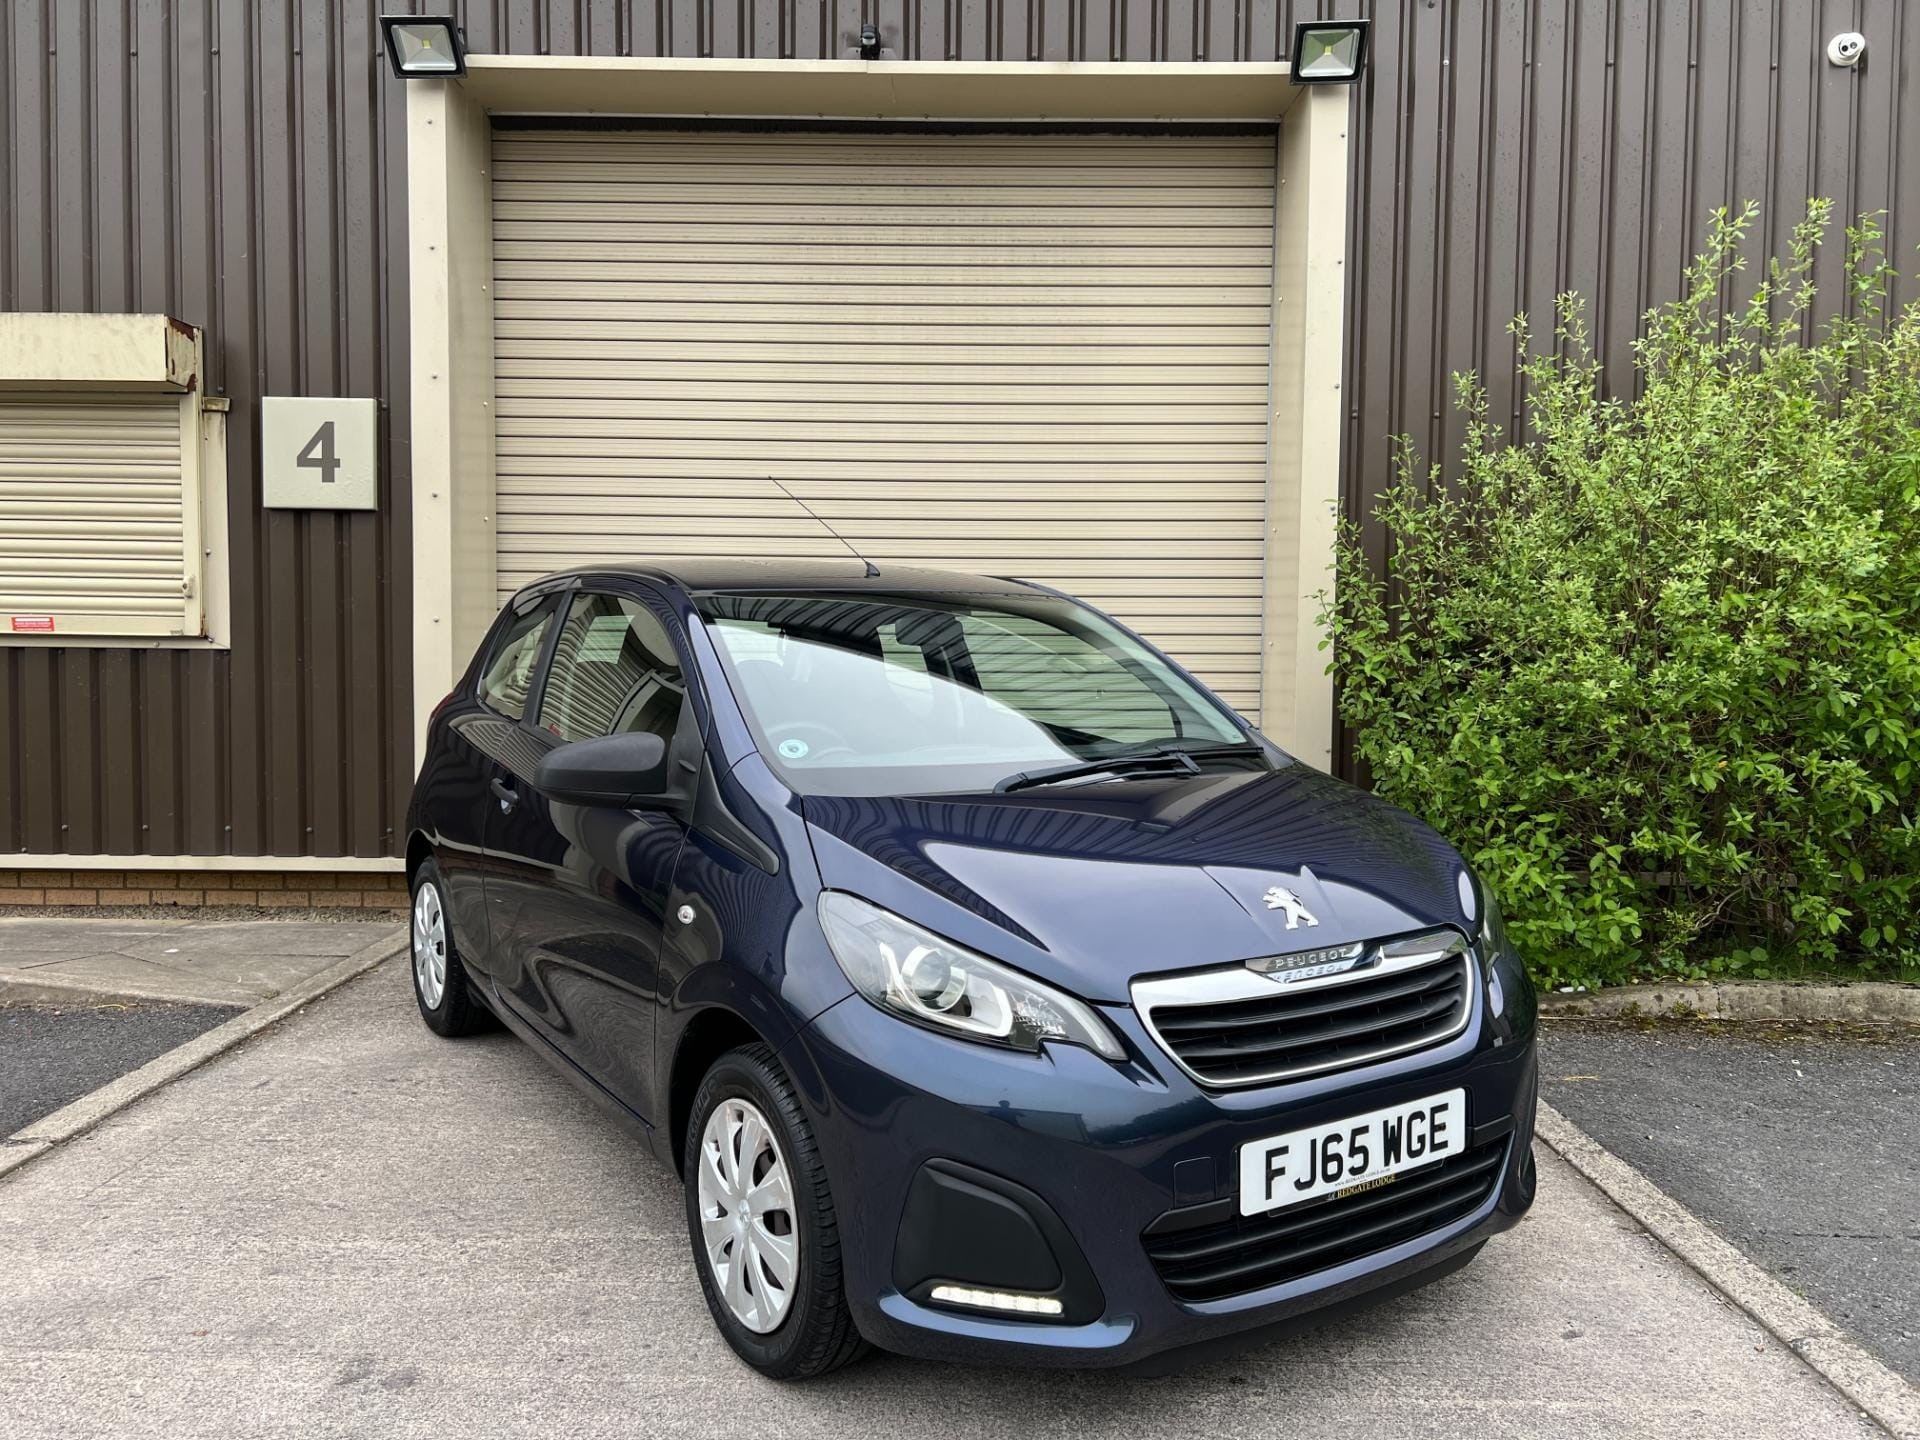 Peugeot 108, In clitheroe lancashire, Ribble cars used, Used peugeot 108, 1920x1440 HD Desktop